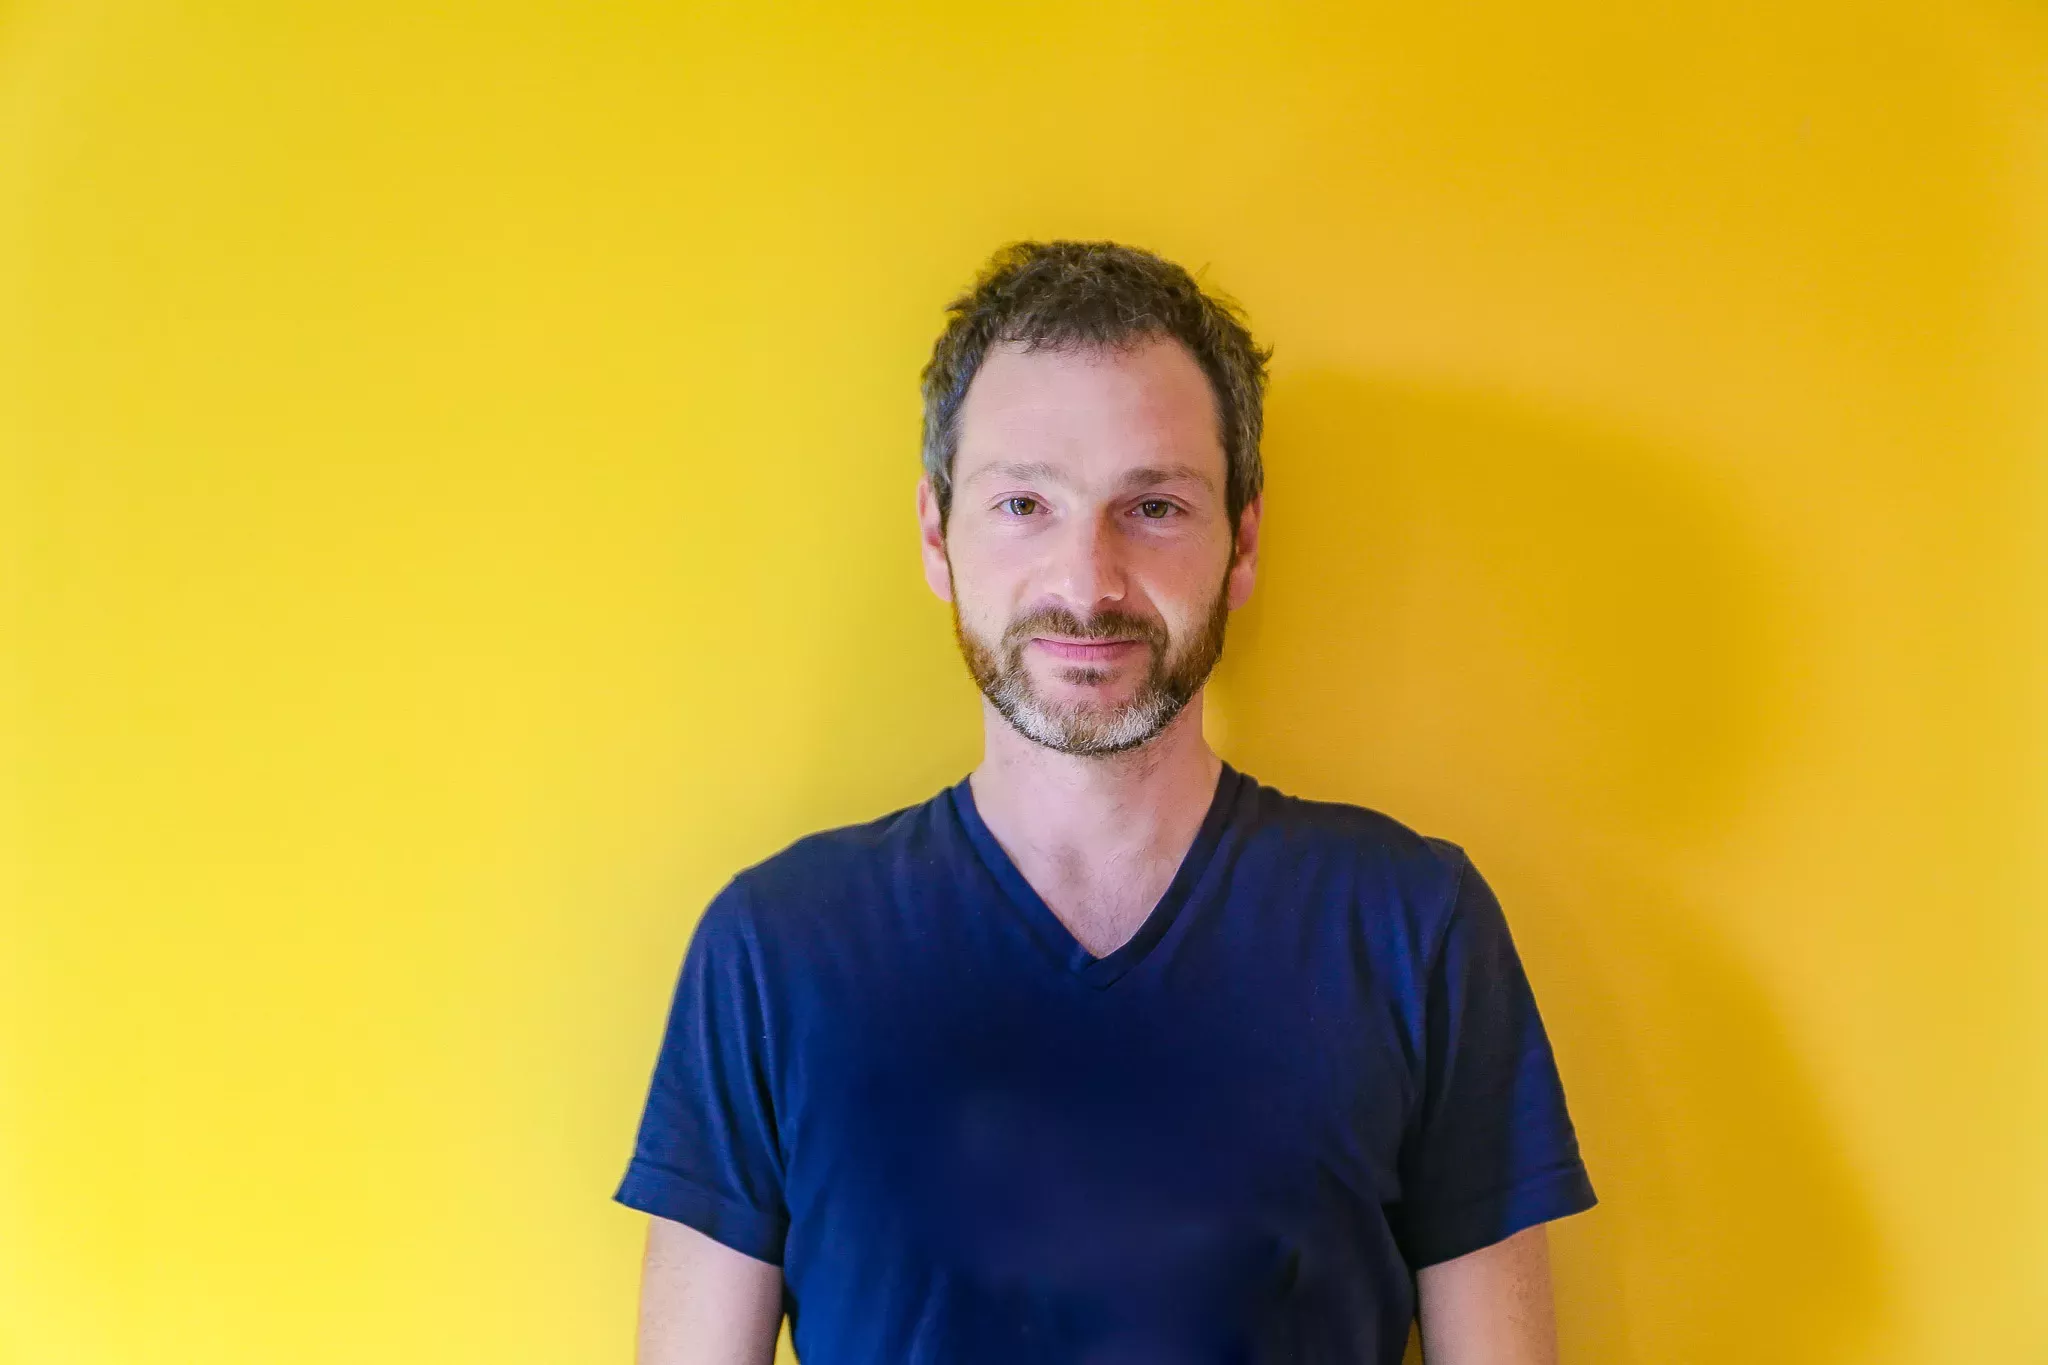 A man with stubble smiling at the camera, wearing a blue t-shirt against a vibrant yellow background.